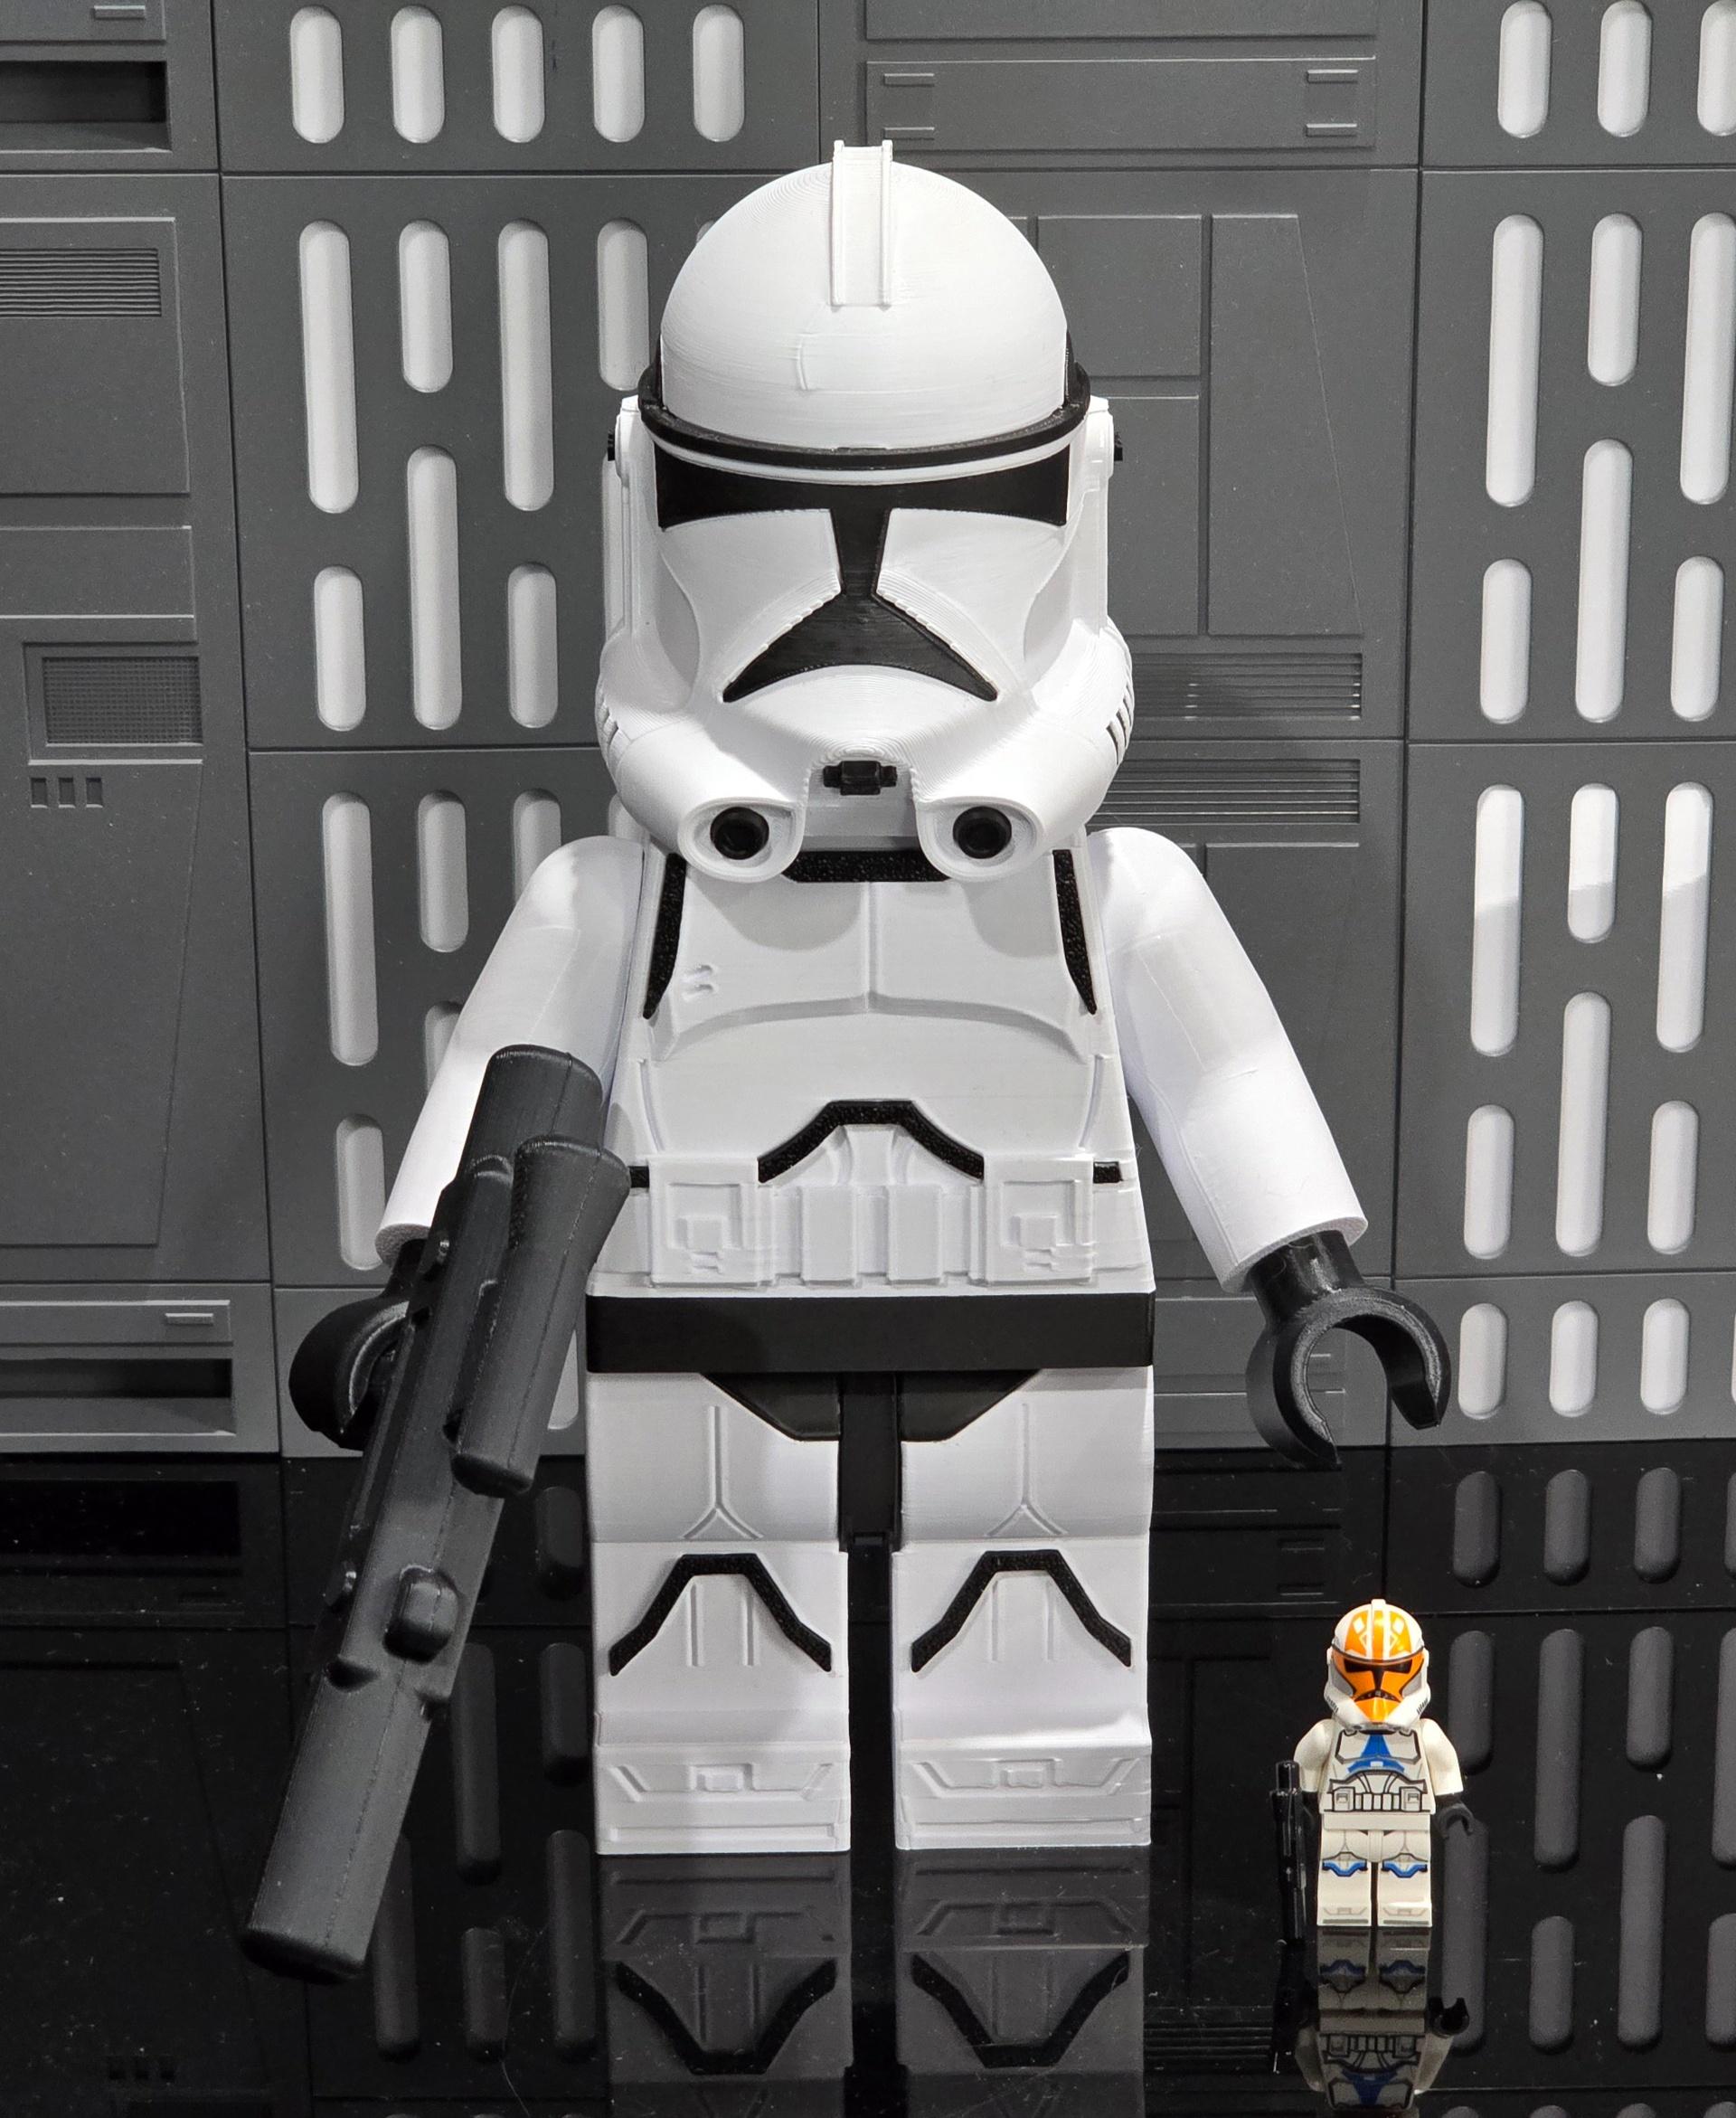 Clone Trooper - Phase II (9 inch brick figure, NO MMU/AMS, NO supports, NO glue) - "I've got clones. They're multiplying. And I'm losing control." - 3d model